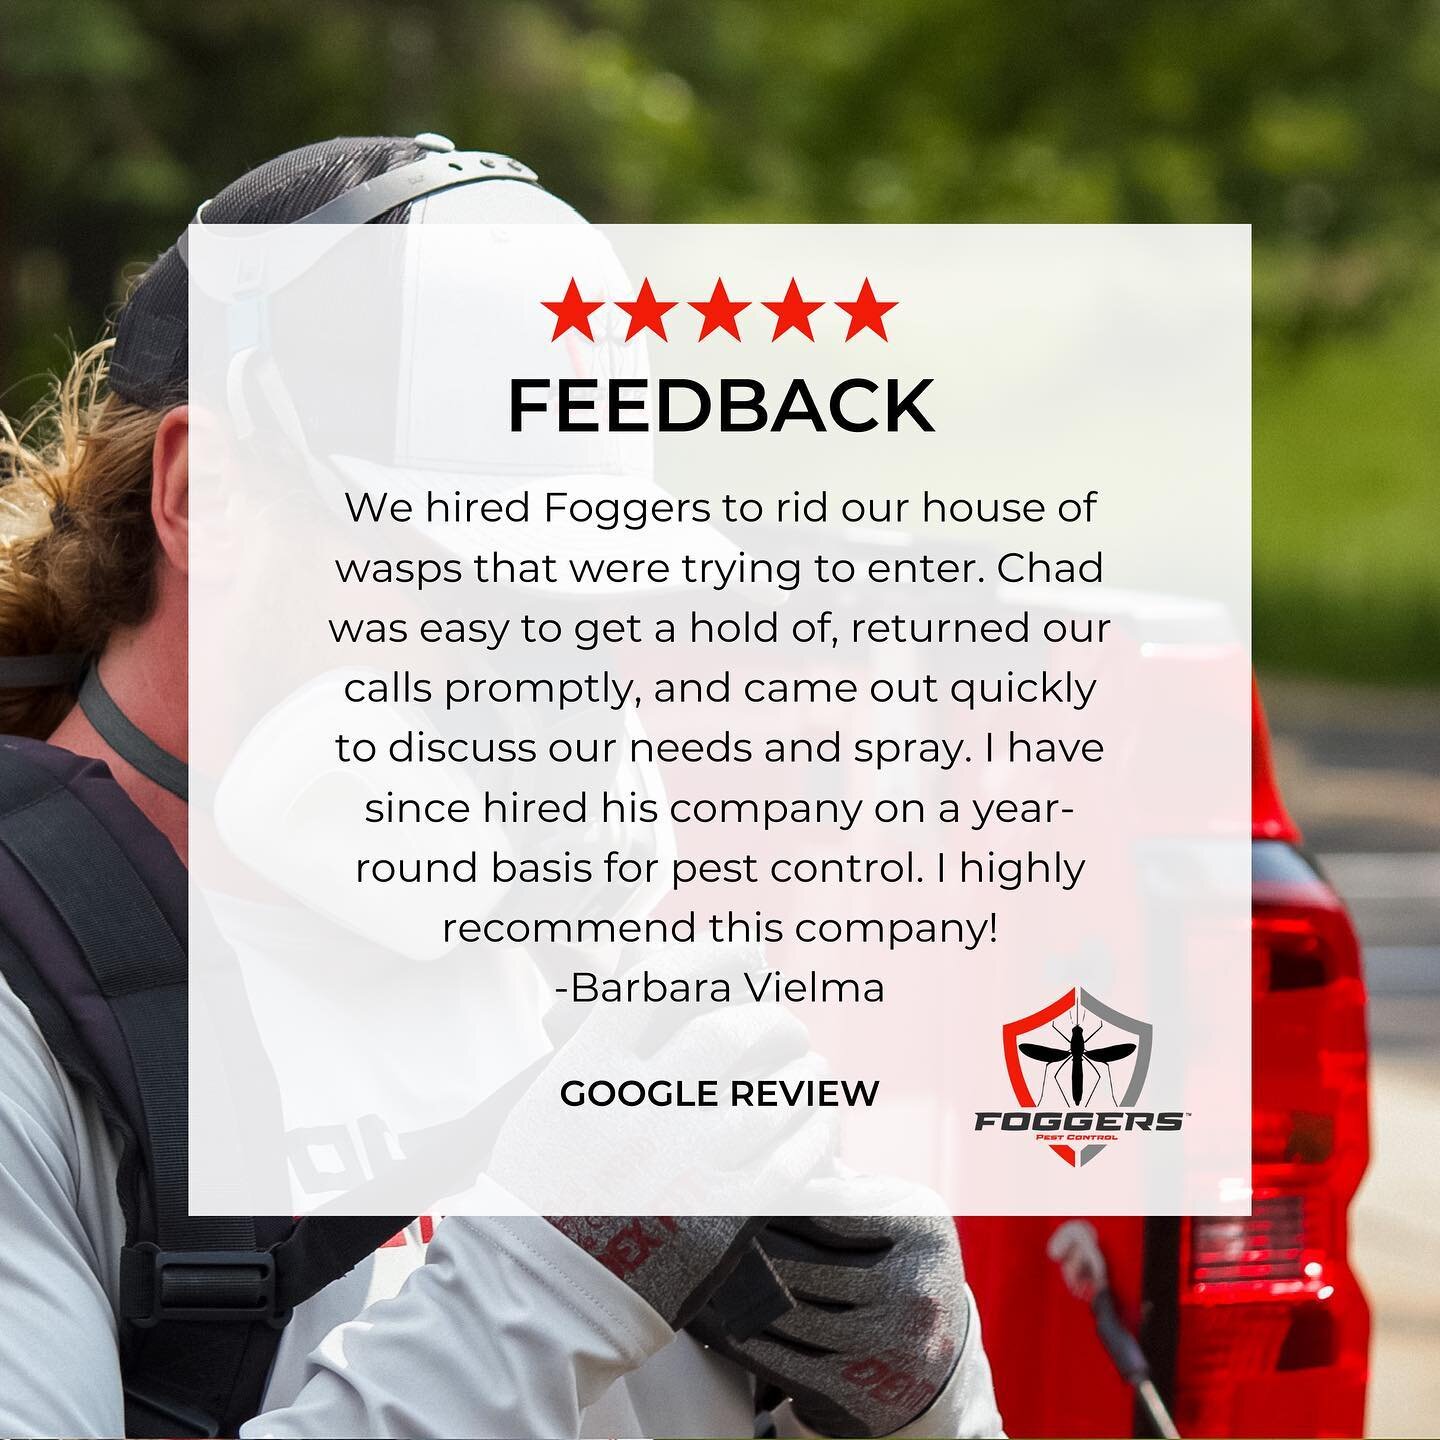 Thank you for your reviews! Give us a call if you need help with a wasp/hornet problem.

#wasps #hornetcontrol #hornetnest #yellowjackets #pestcontrol #pestcontrolservice #pestcontrollife #minnesota #hornetnest #wasp #waspnest #hornet #upnorthmn #mnb